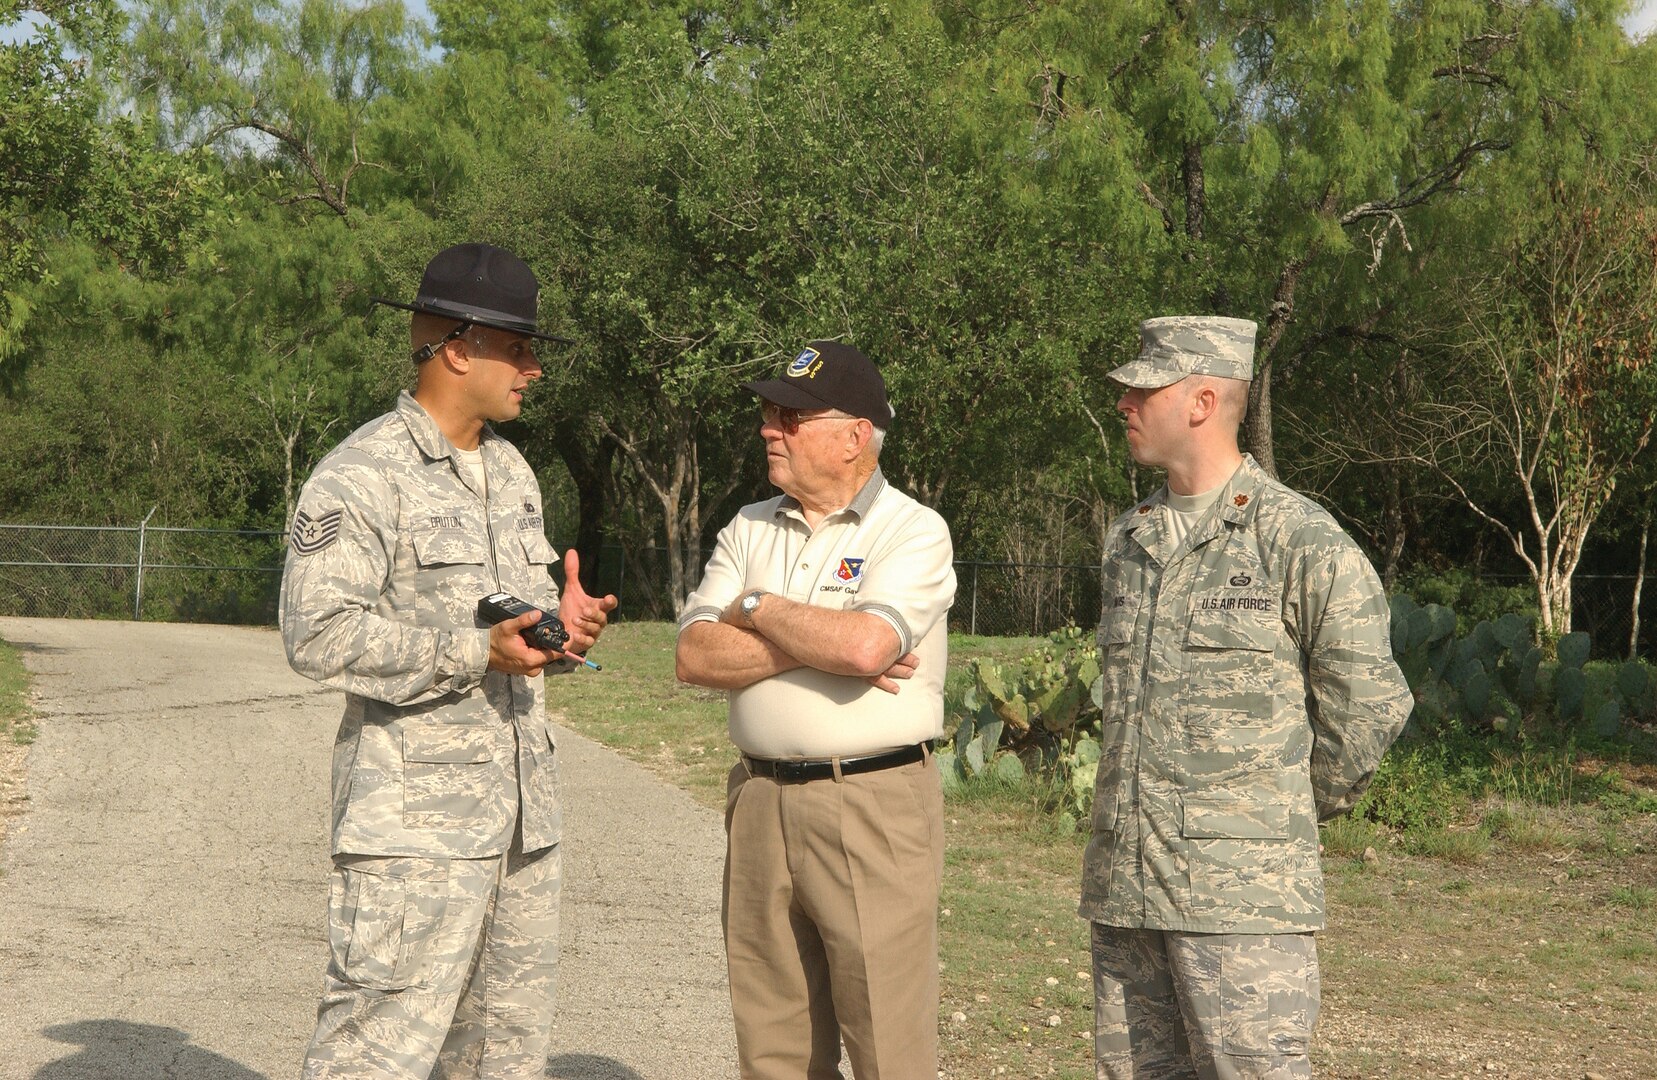 7/17/2008 - Retired Chief Master Sgt. Robert Gaylor, the fifth chief master sergeant of the Air Force, Tech. Sgt. Timothy Bruton, 737th Training Support Squadron, and Maj. Danny Davis, 324th Training Squadron, discus the changes taking place at basic military training July 17.  Chief Gaylor toured basic military training, seeing first-hand how the Air Force is developing warrior Airmen. (USAF photo by Alan Boedeker)